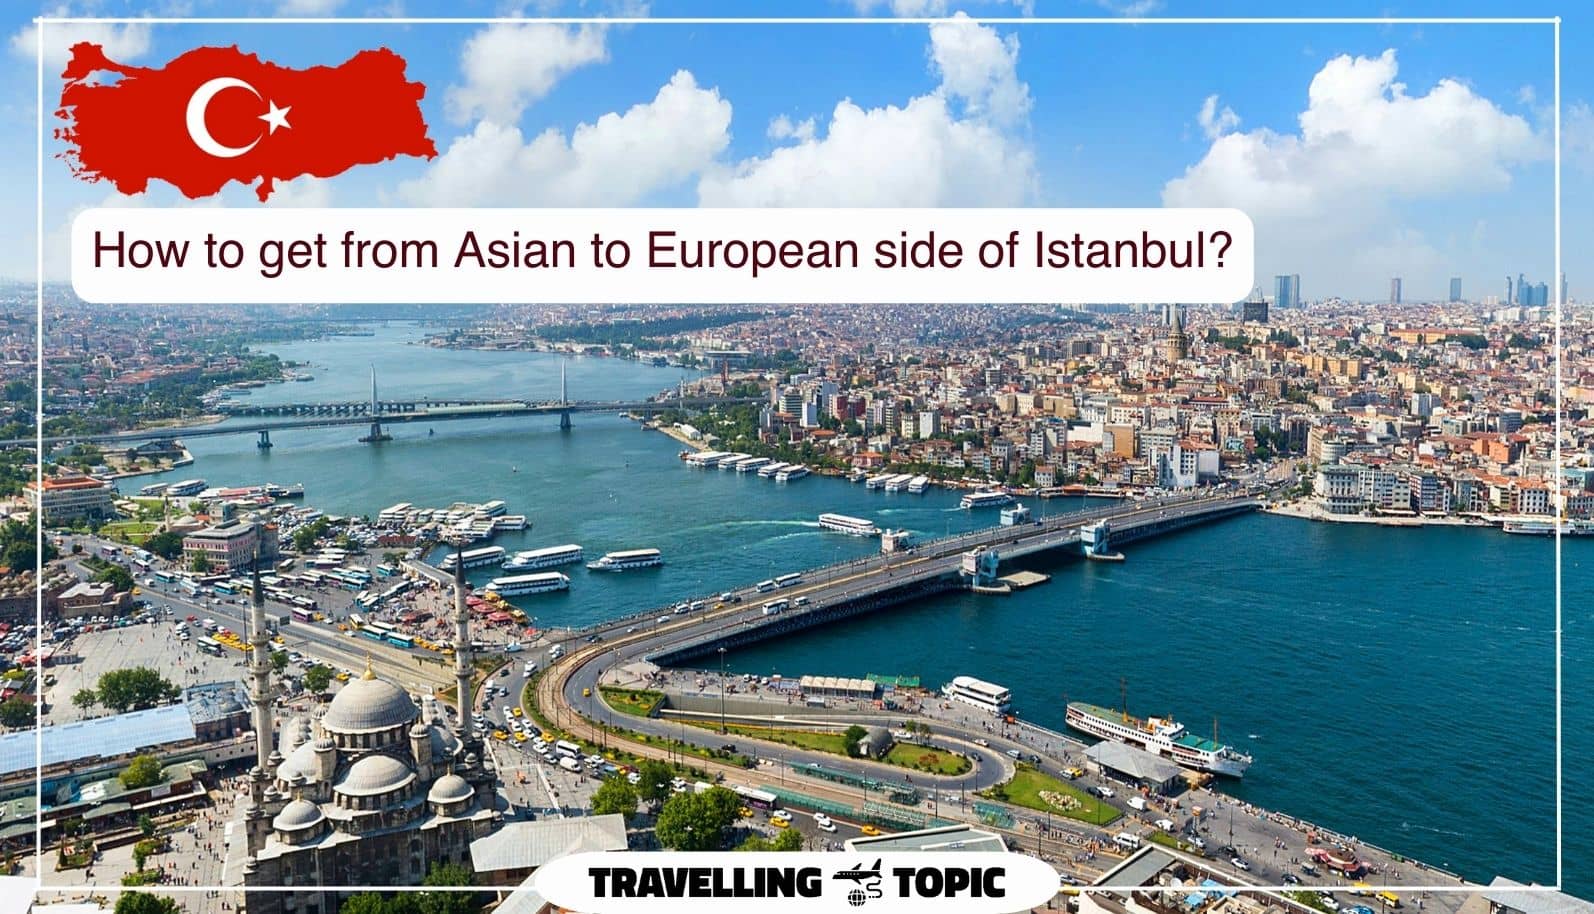 How to get from Asian to European side of Istanbul?